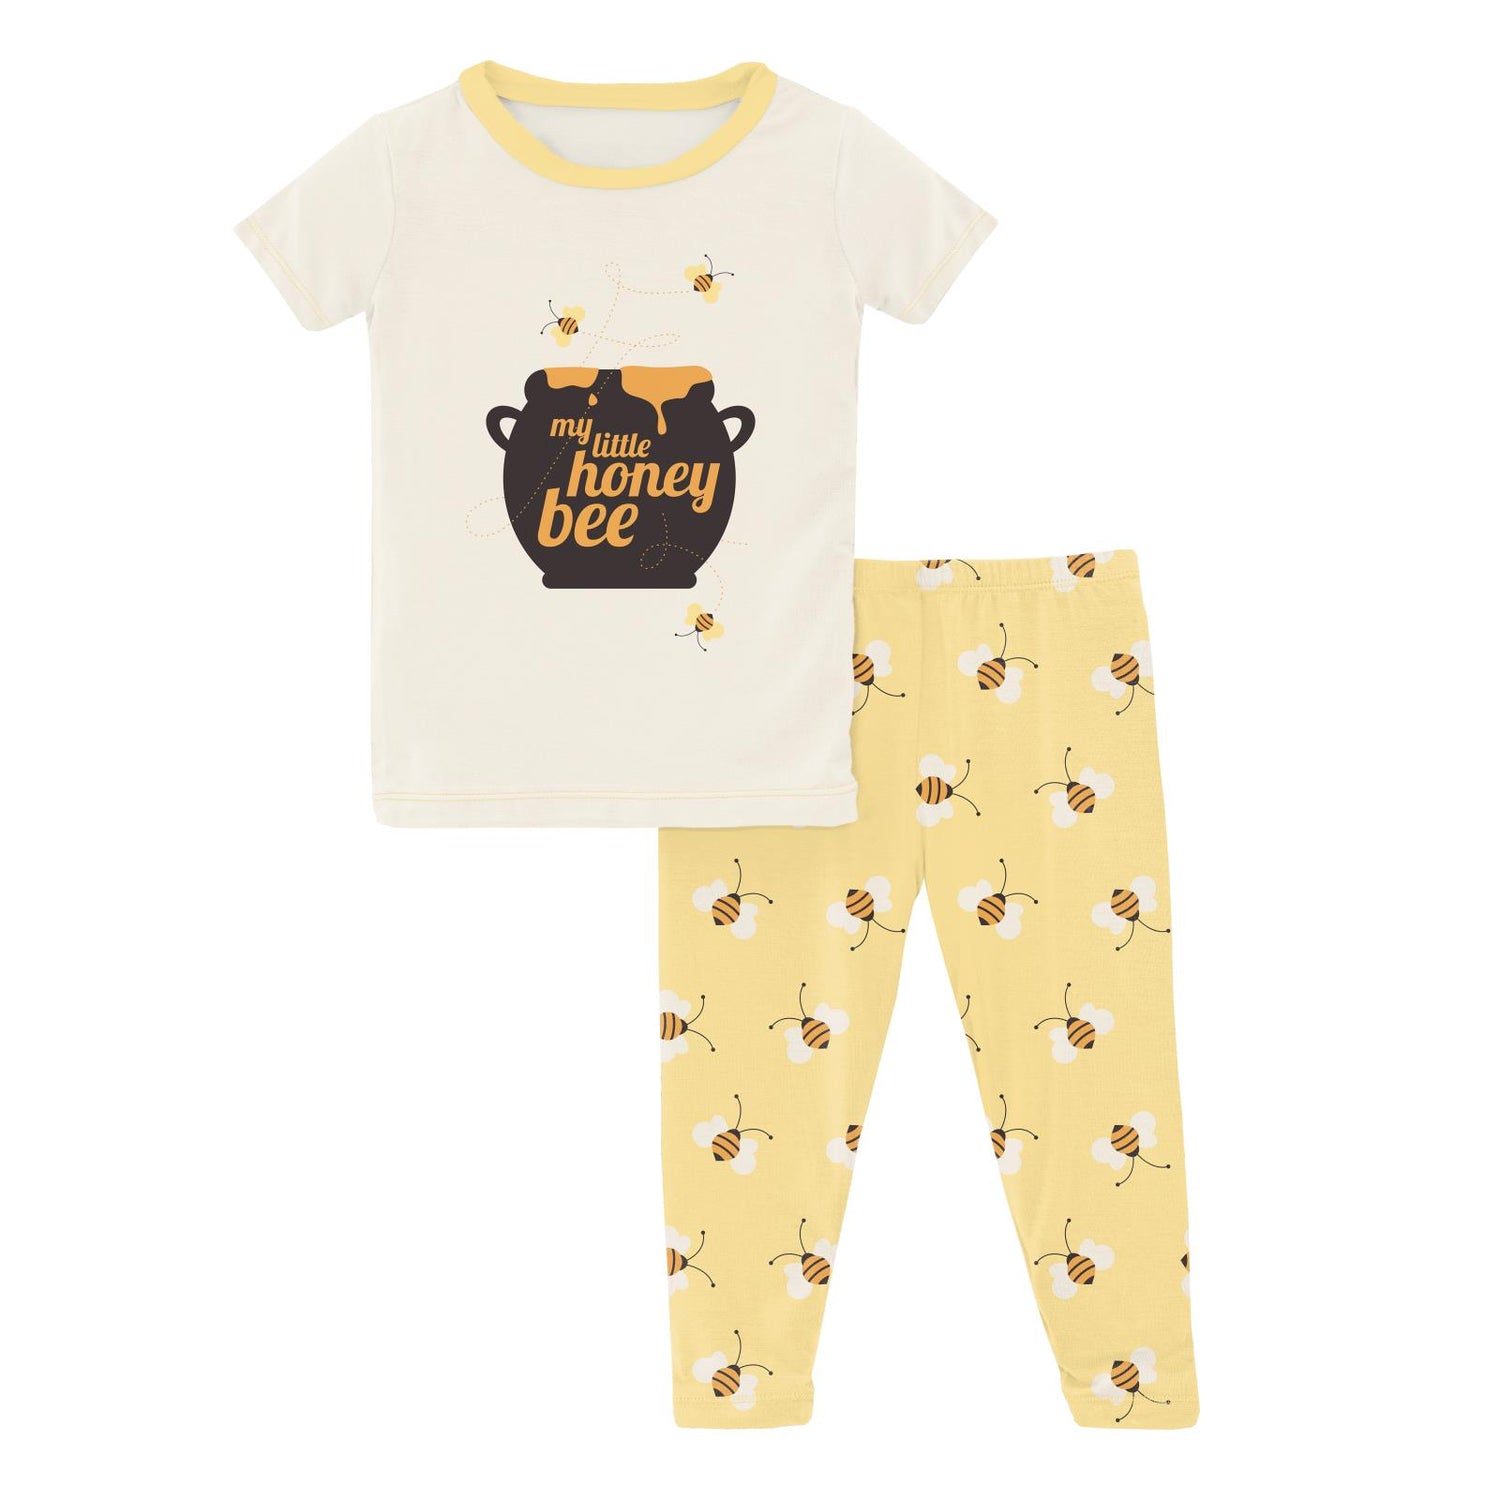 Short Sleeve Graphic Tee Pajama Set in Wallaby Bees